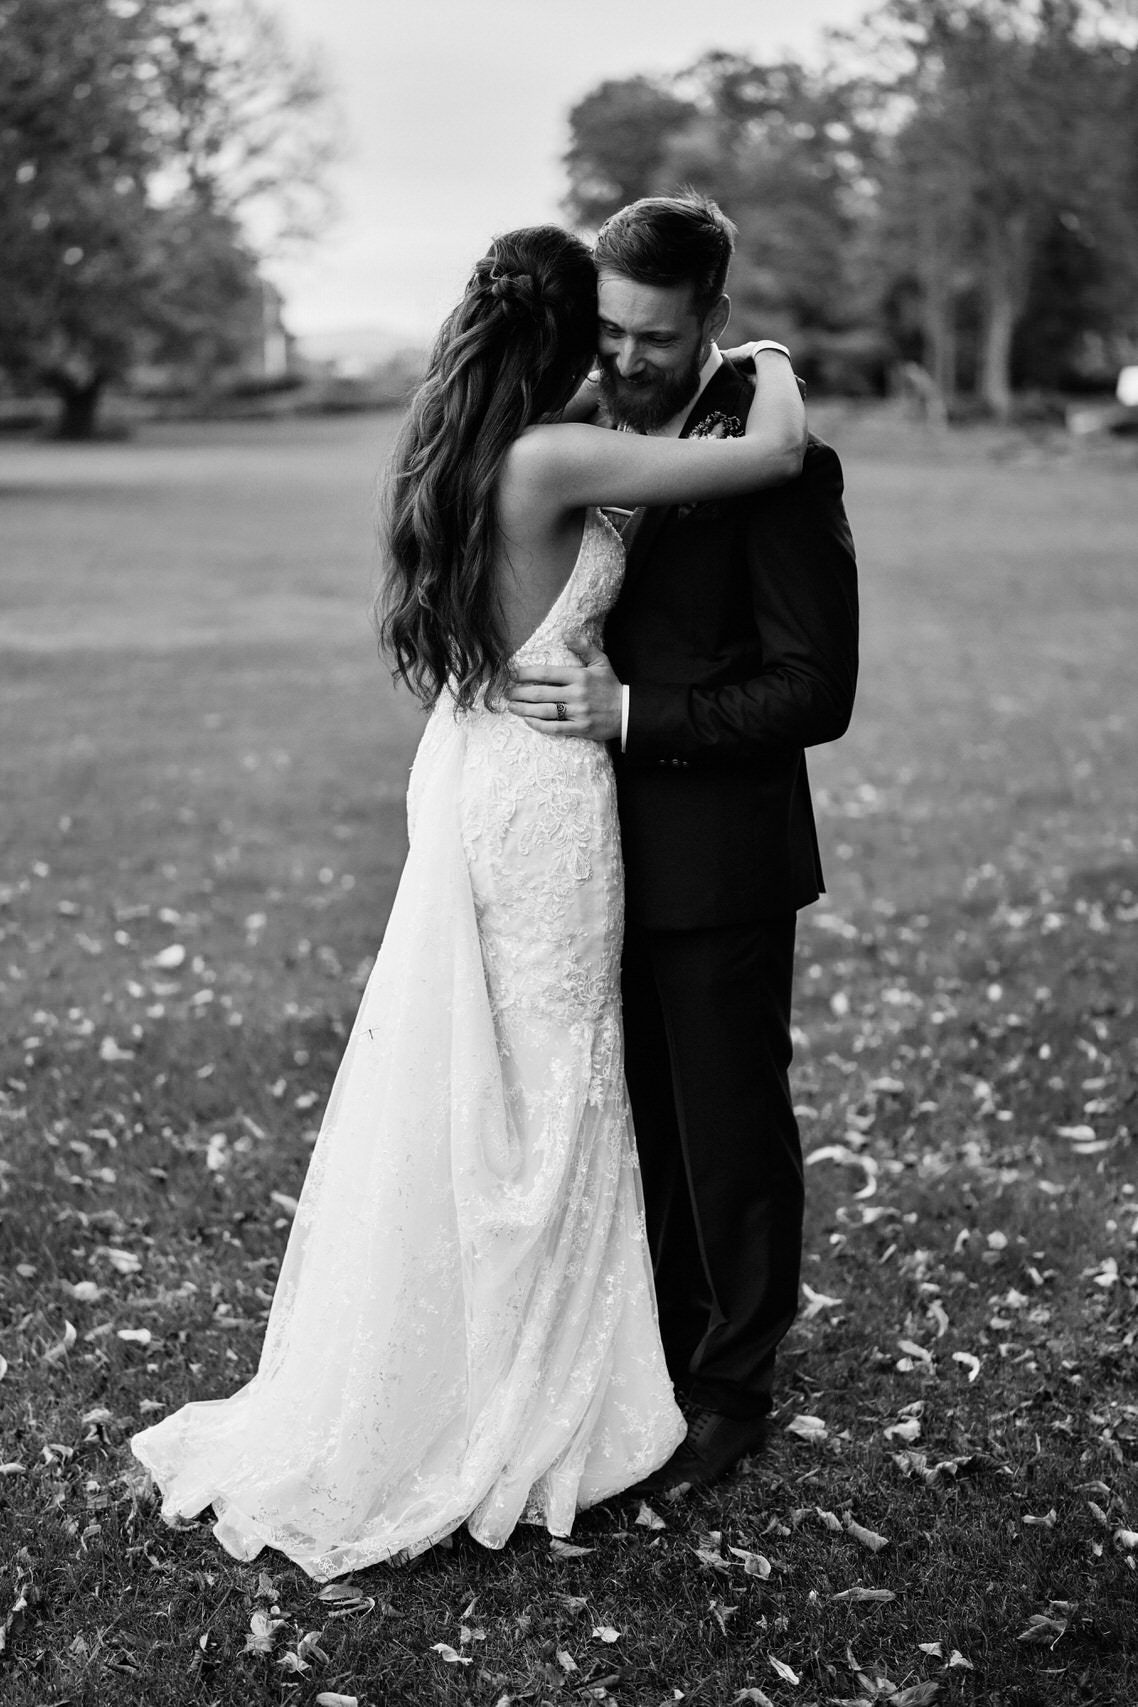 A black and white picture of a newly married couple embracing each other in a field.